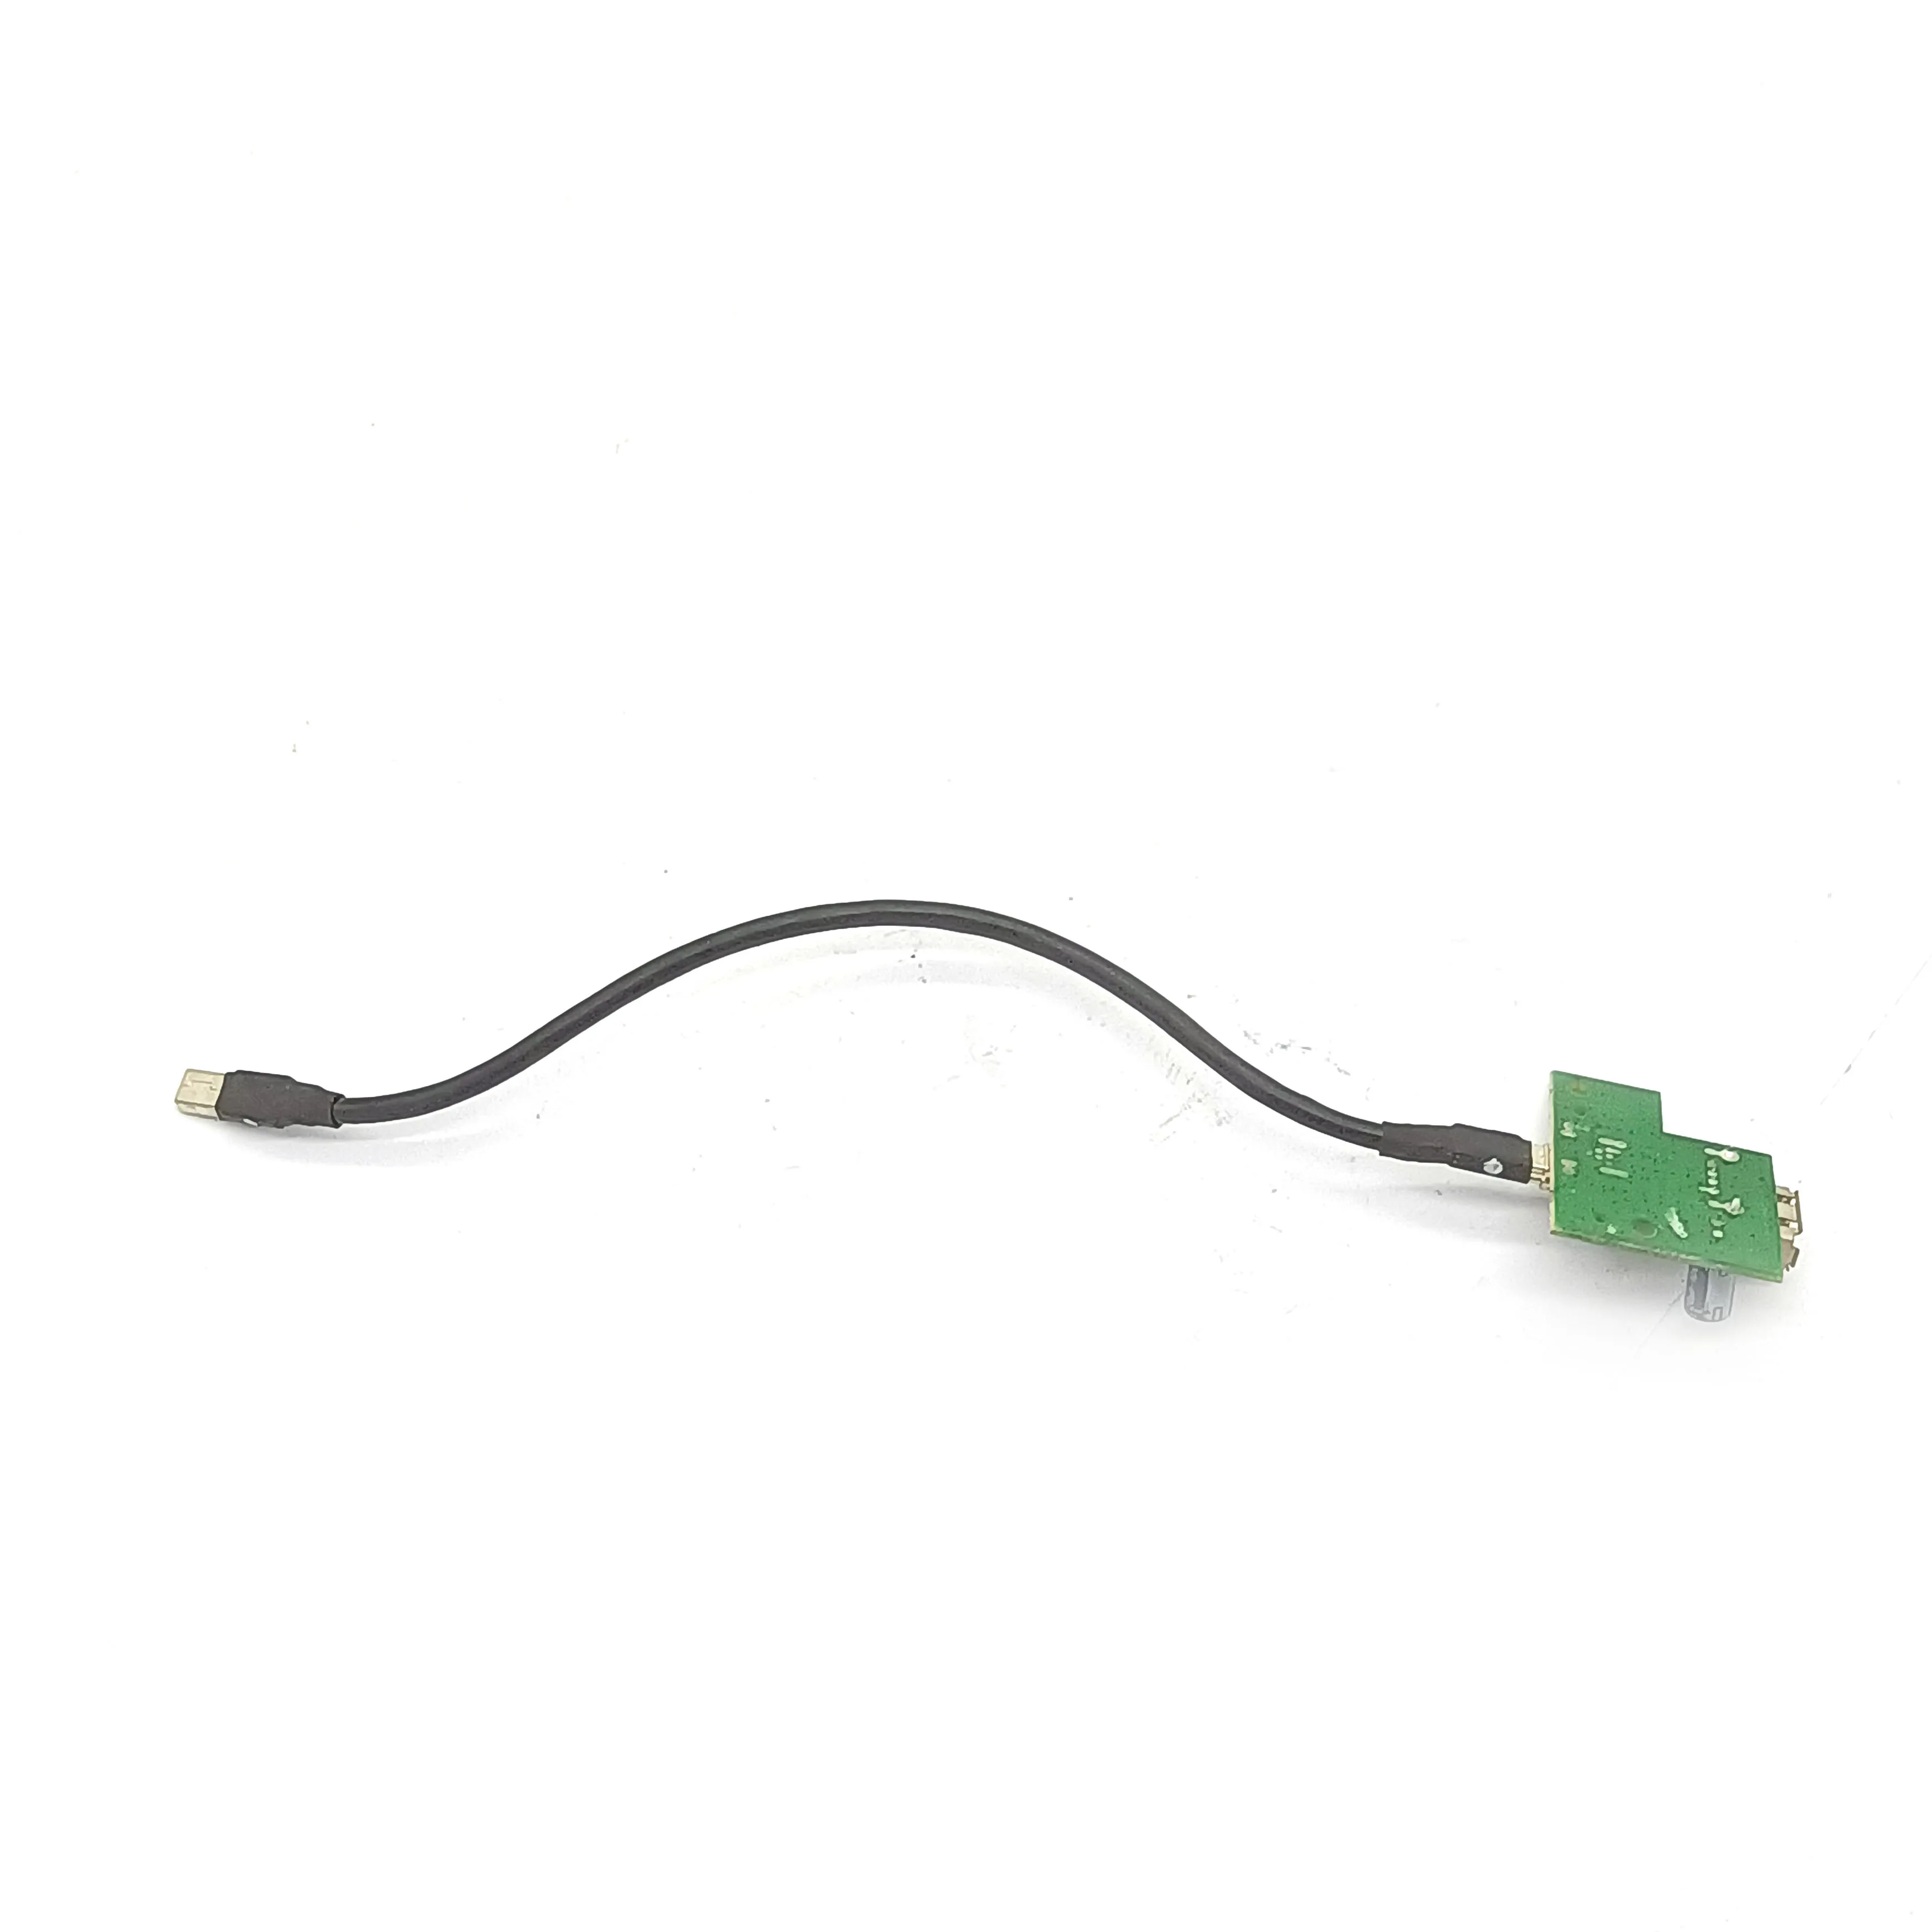 

Interface Card G3J47-80075 Fits For HP 7612 6600 7621 6100 6060 7110 7610 6060e 6100e 7600 7512 6700